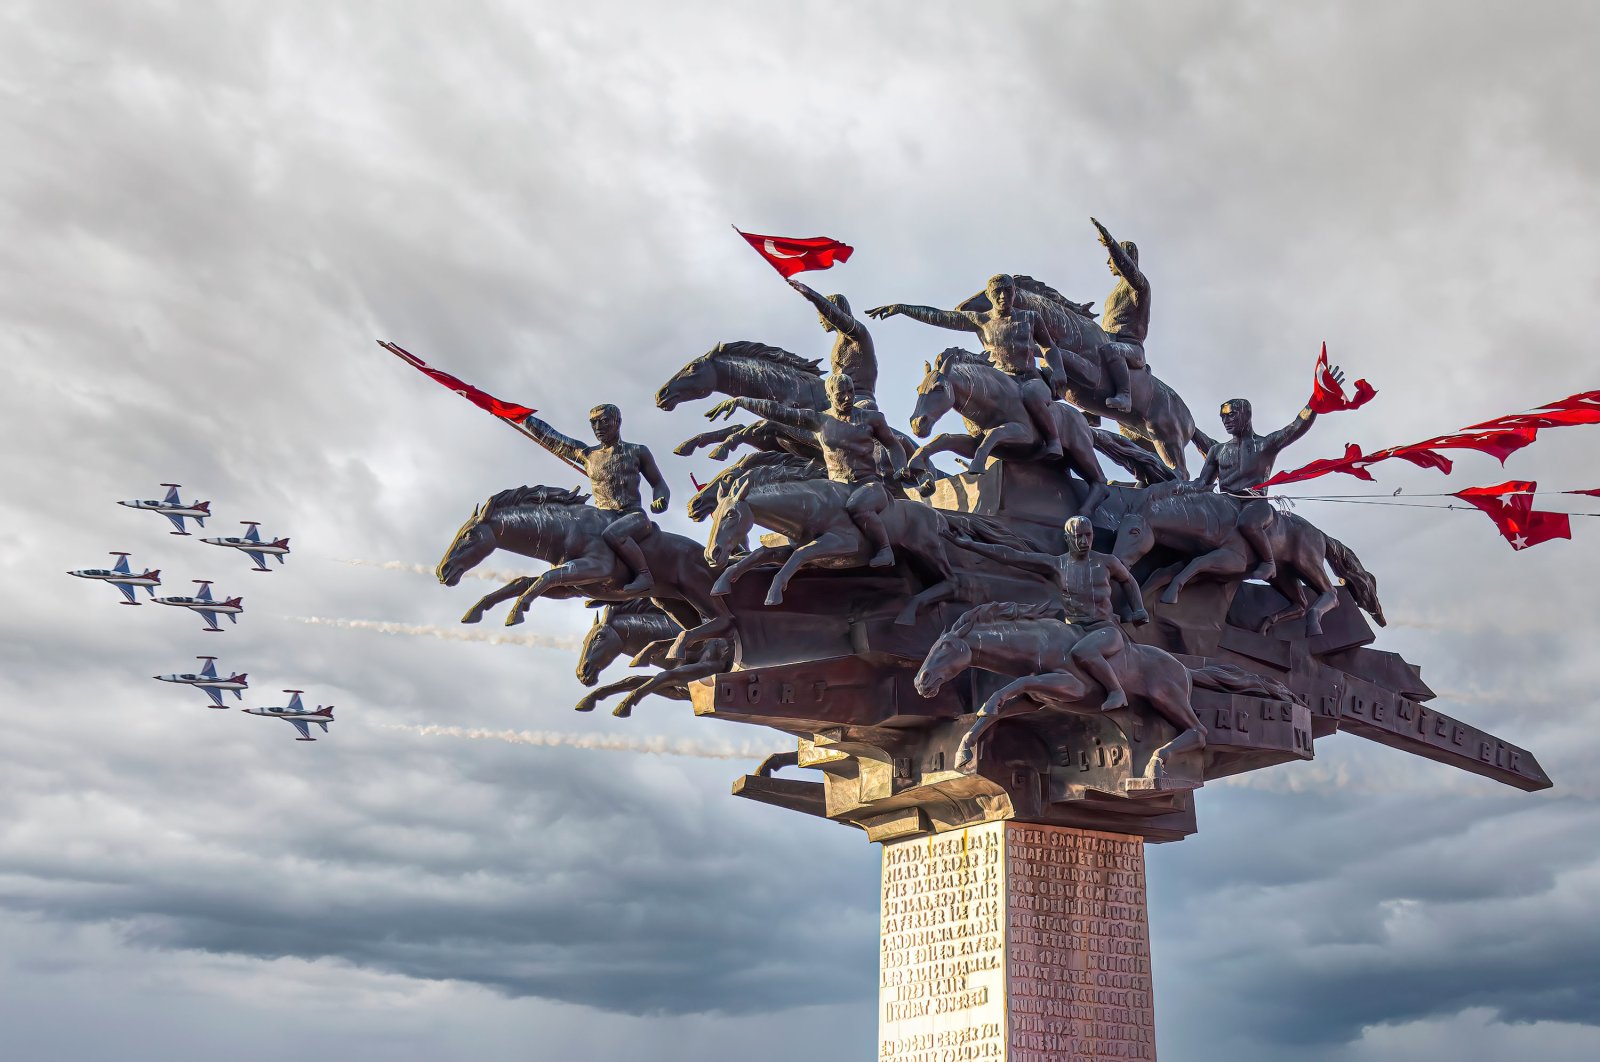 The Tree of the Republic statue built to commemorate the 80th anniversary of the Republic of Turkey is seen as Turkish jets carry out a demonstration flight on the anniversary of Izmir&#039;s liberation from Greek occupation forces on Sept. 9, 1922, in the Kordon district, Izmir, western Turkey, Sept. 9, 2019. (Photo by Shutterstock)